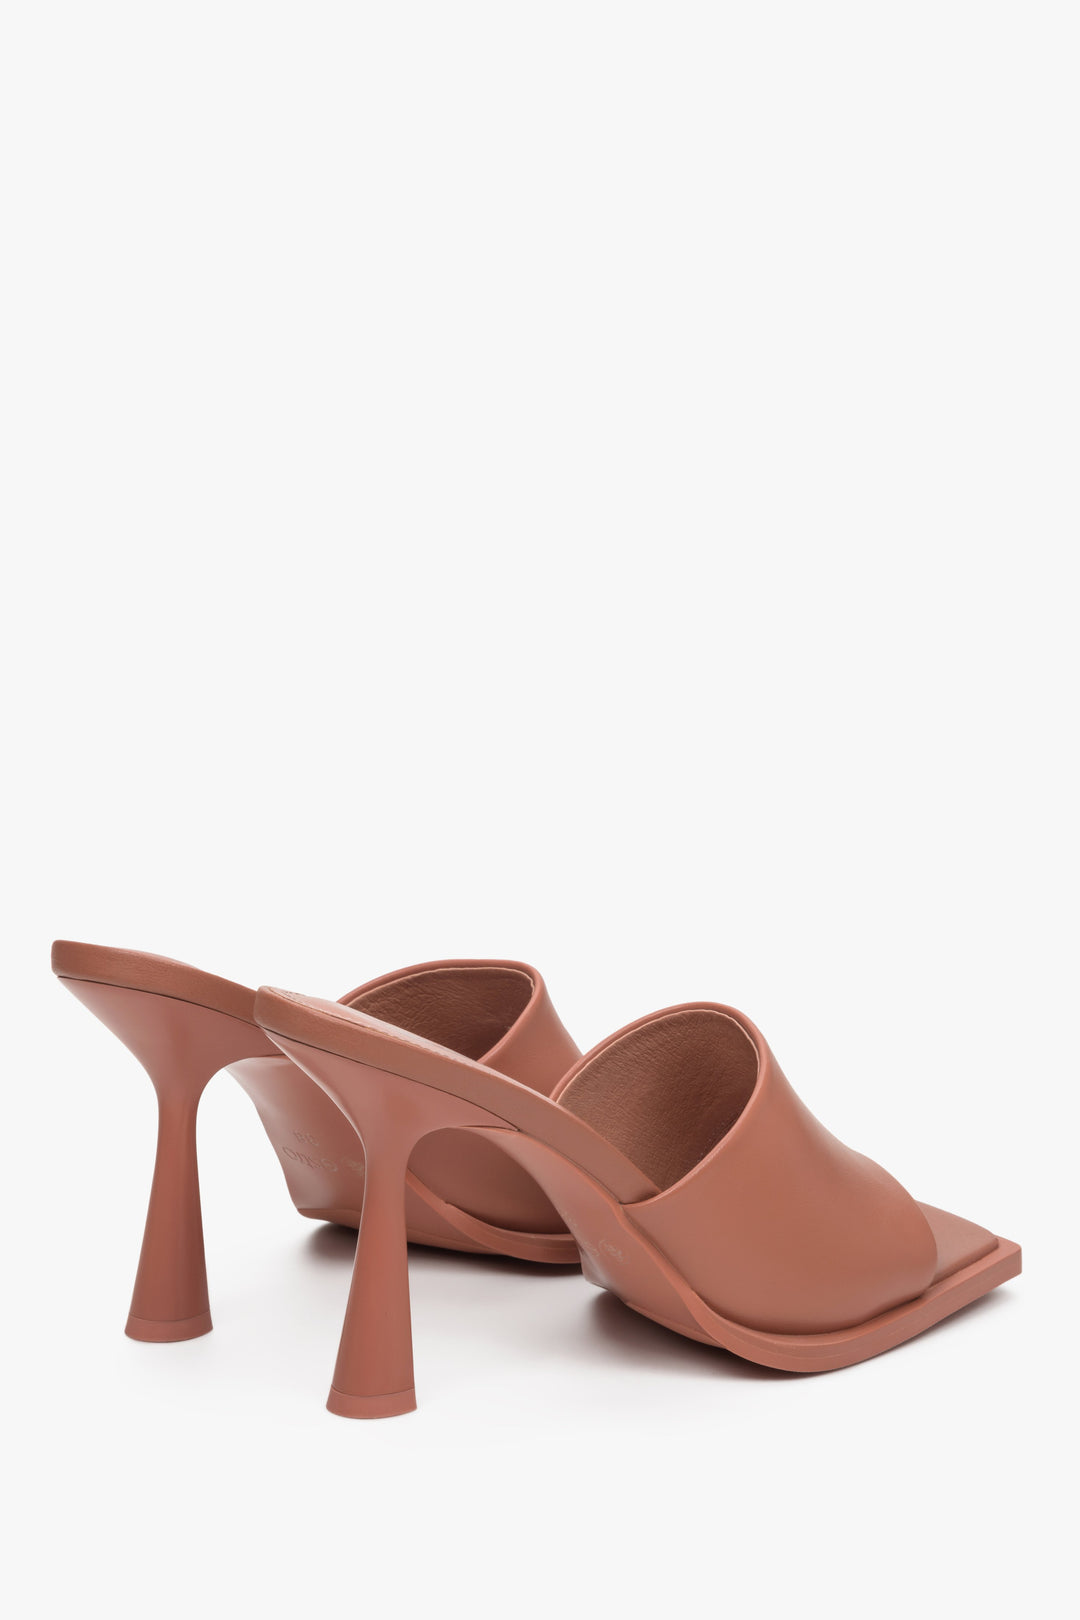 Brown leather women's stiletto mules made of natural leather.